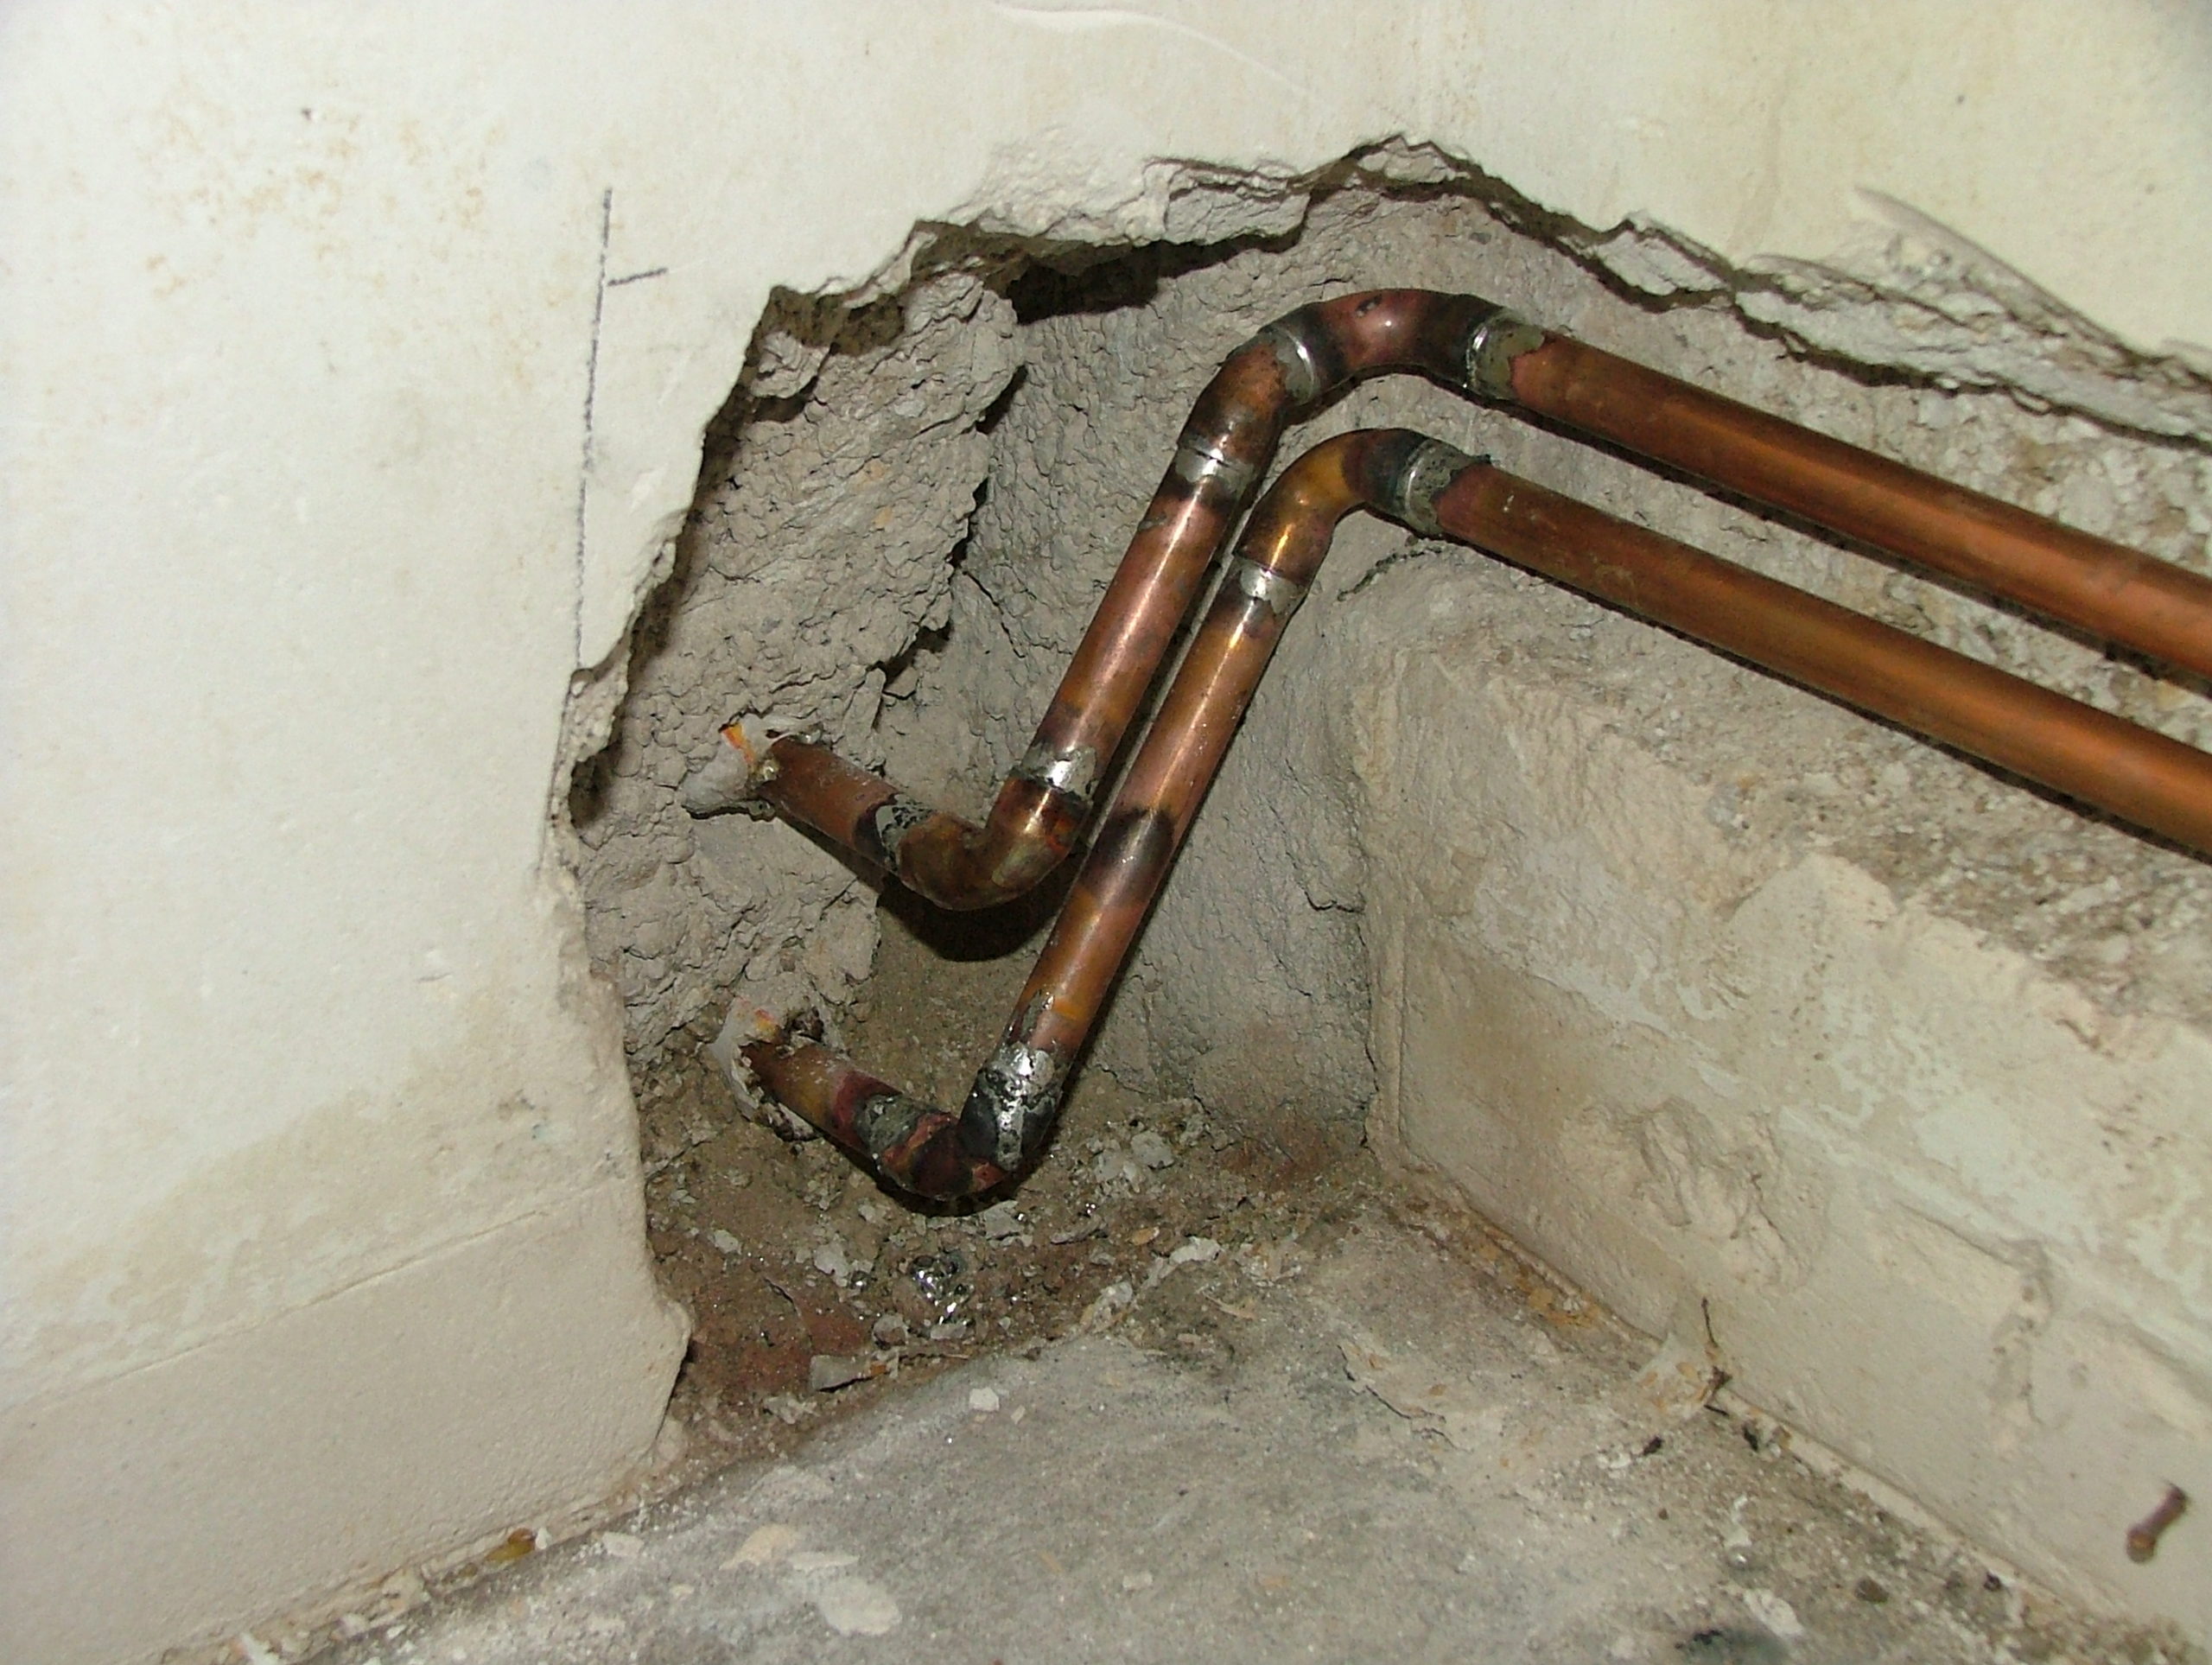 Until 1987, lead solder was commonly used to connect copper water pipes inside homes and buildings. Photo credit: Denver Water.